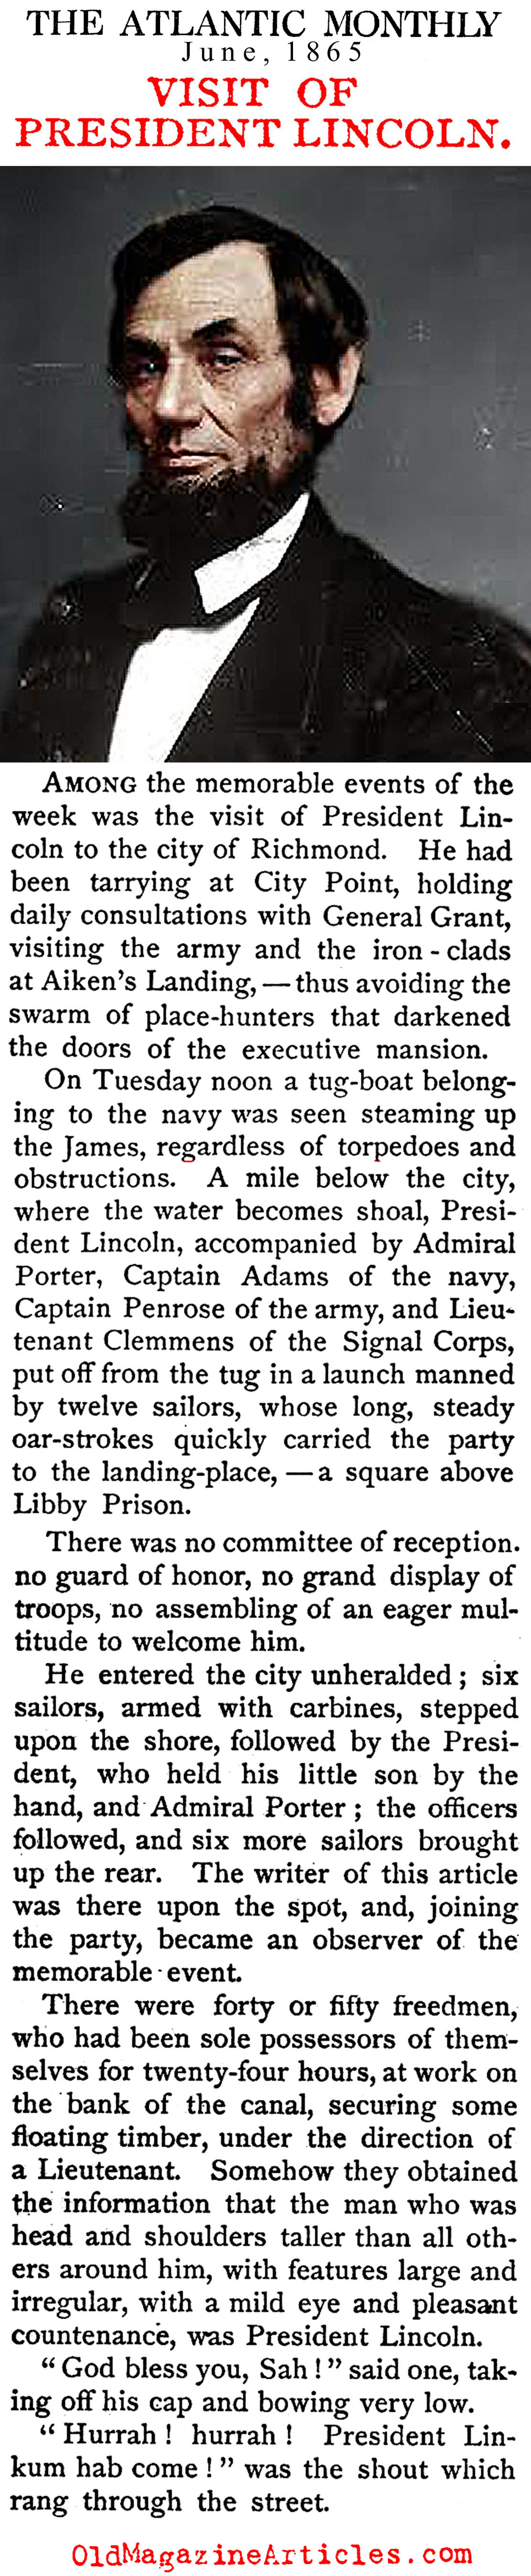 An Eyewitness Account of Lincoln's Visit to Richmond  (Atlantic Monthly, 1865)